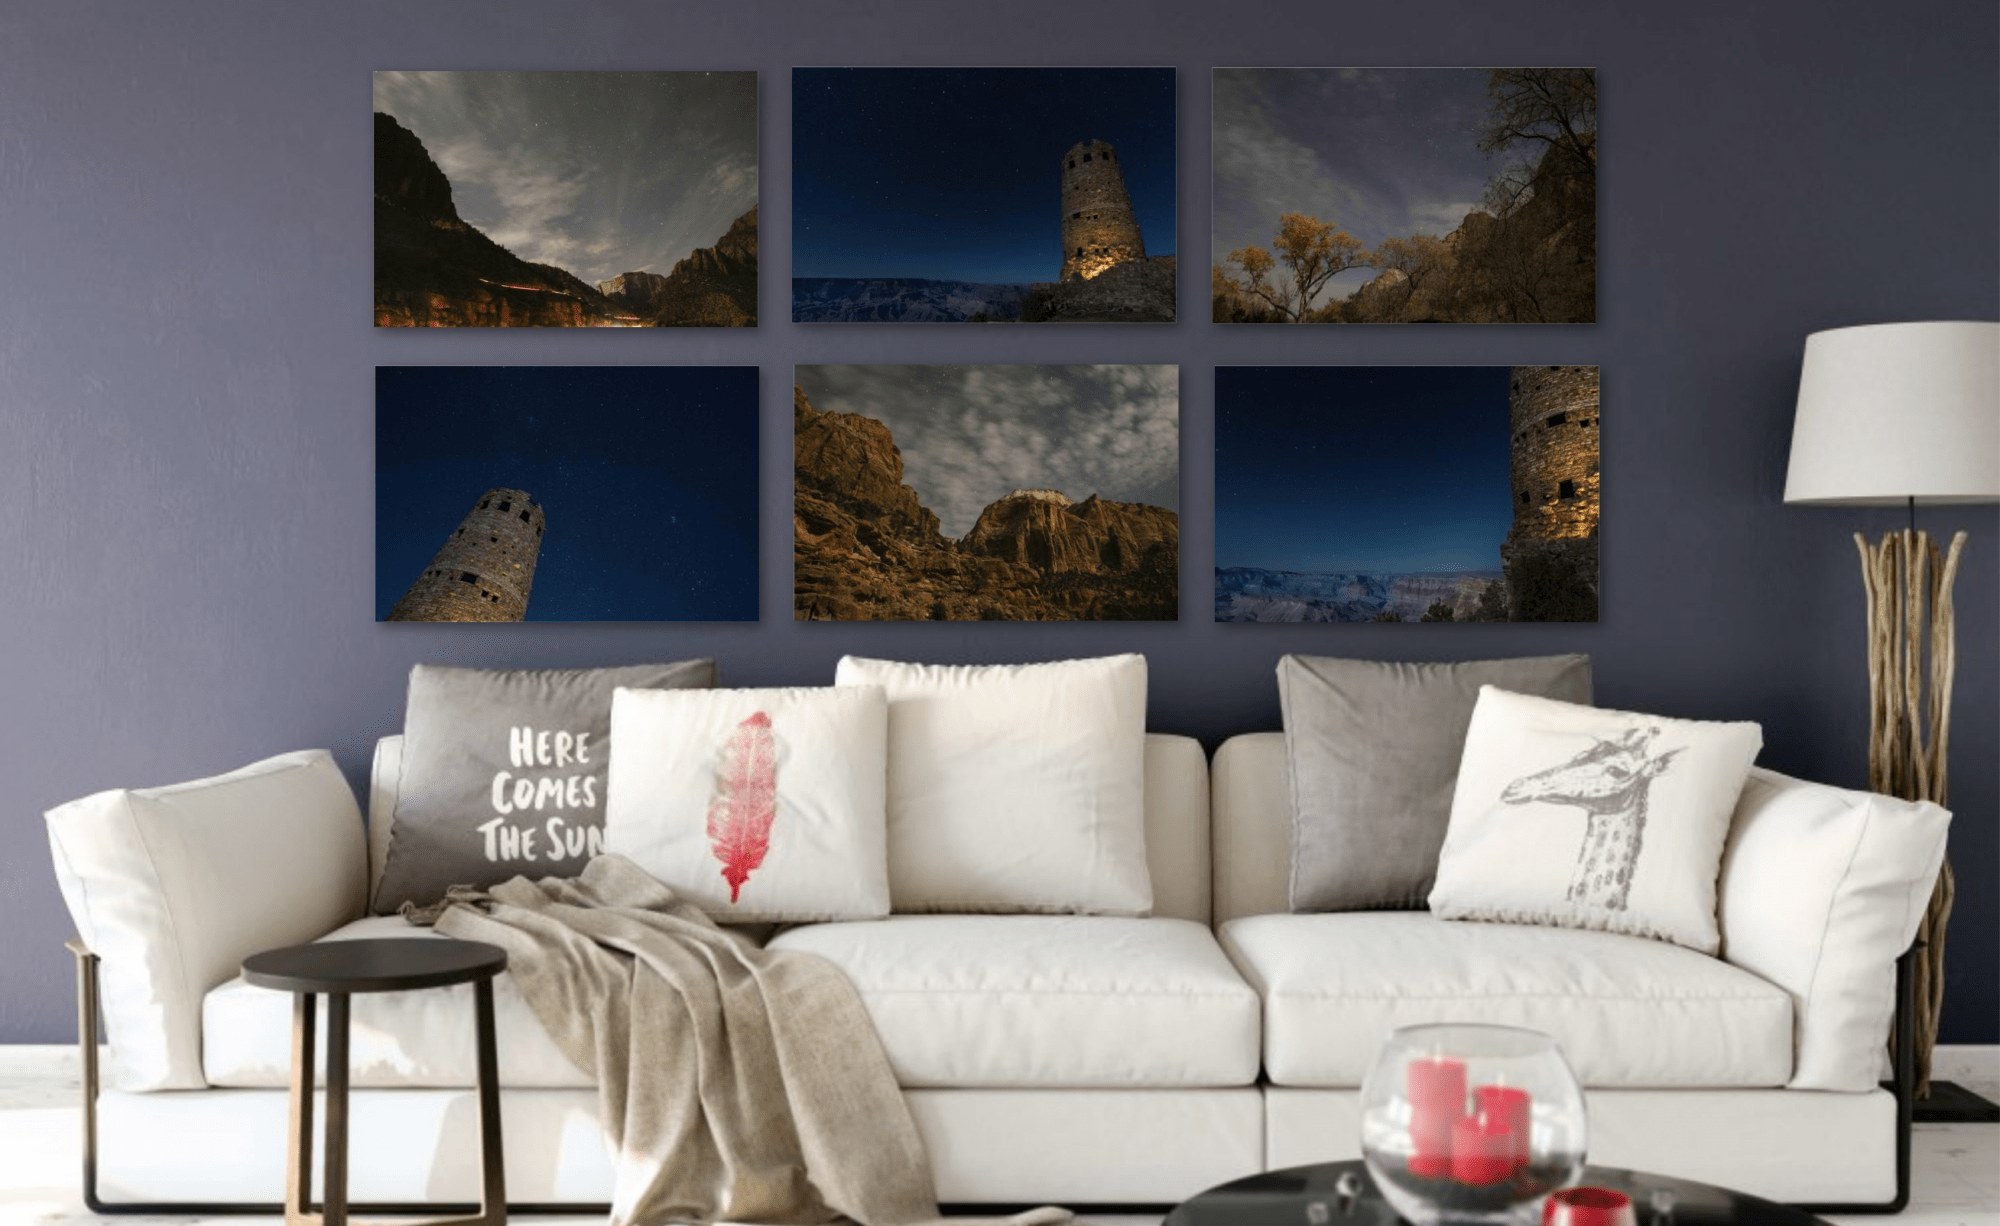 Living room wall decorated with six 24x36 fine art pieces with night photographs of the Grand Canyon and Zion National Park